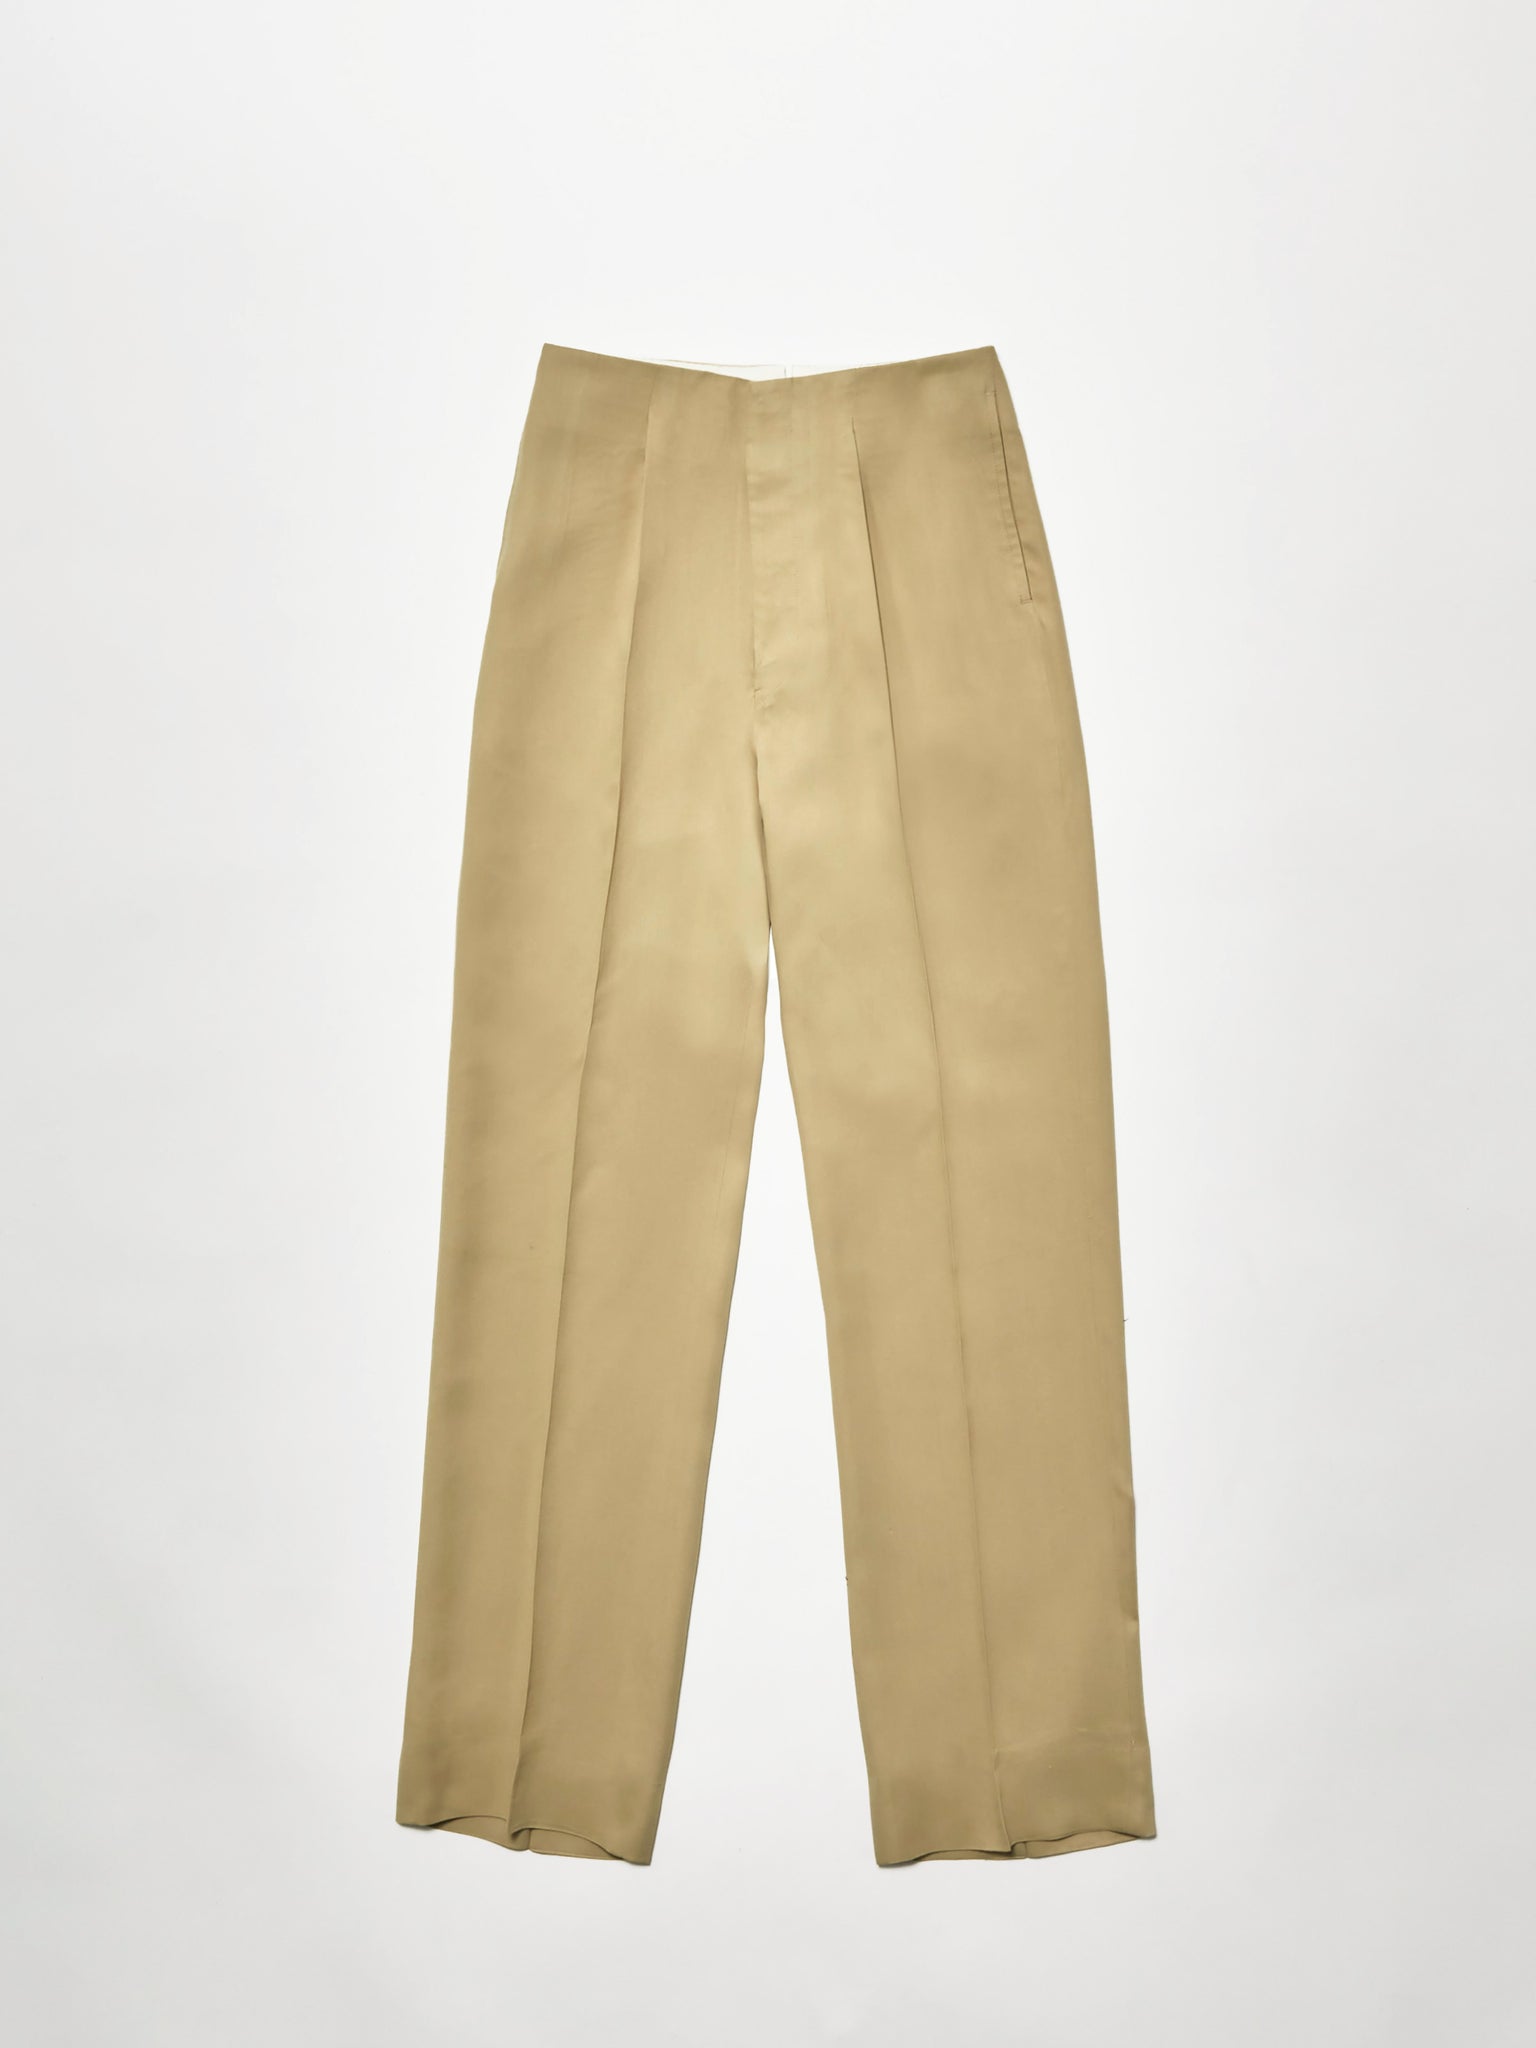 a pleated suiting trouser - tan